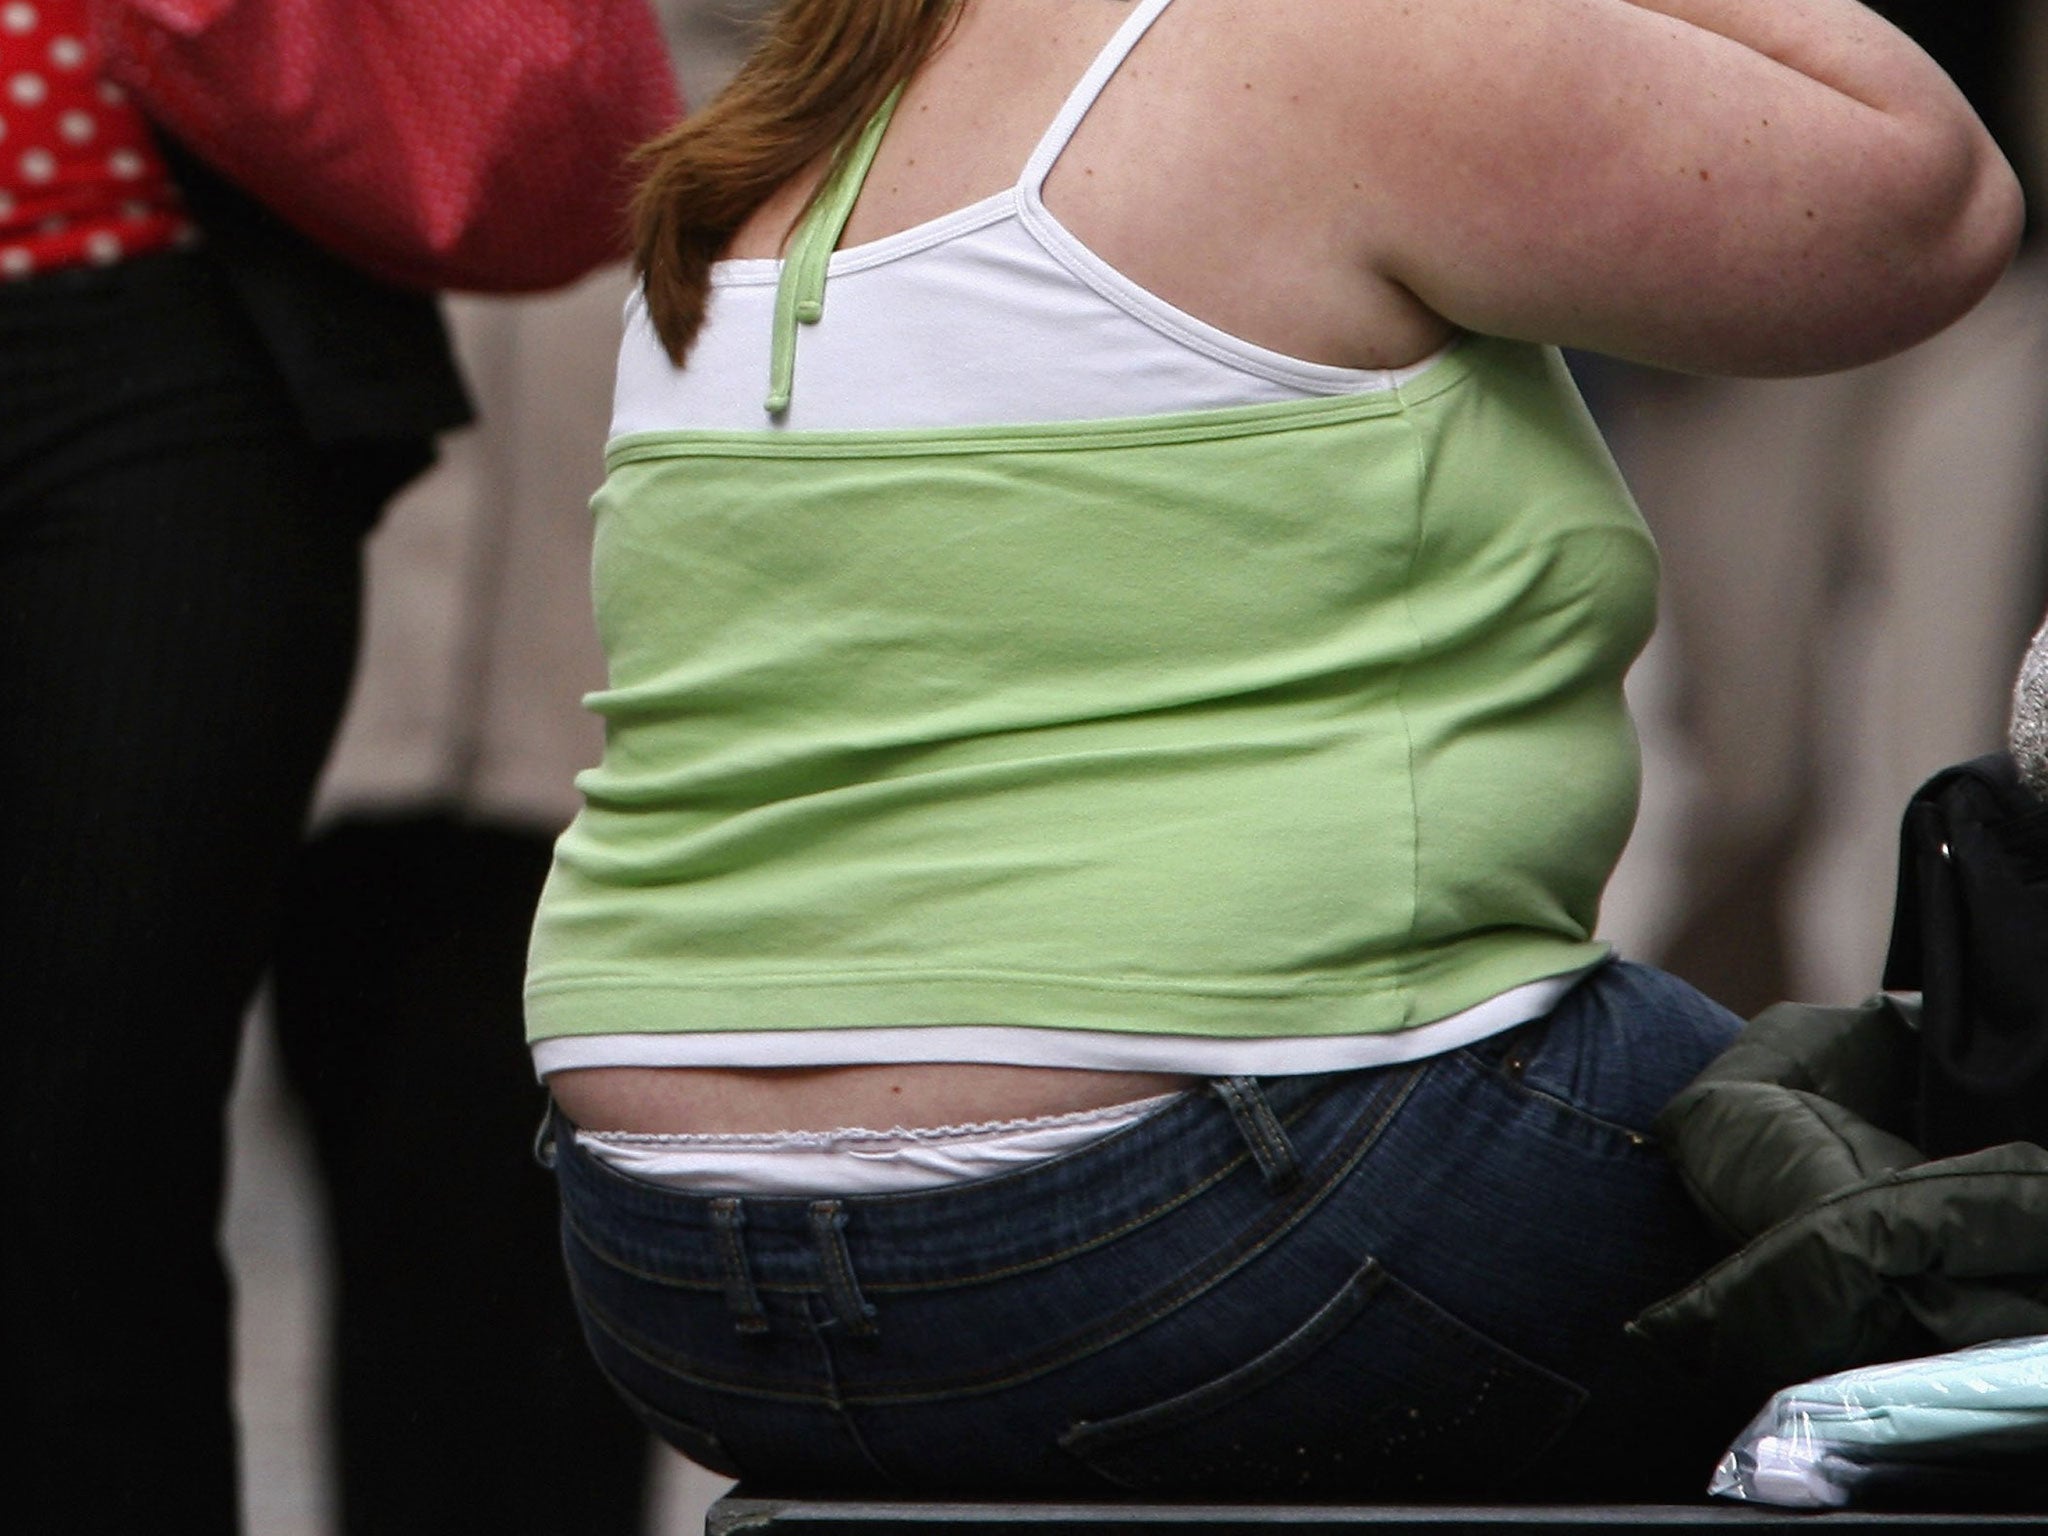 Abdominal fat, known as 'bad' fat, contributes to weight-related health problems